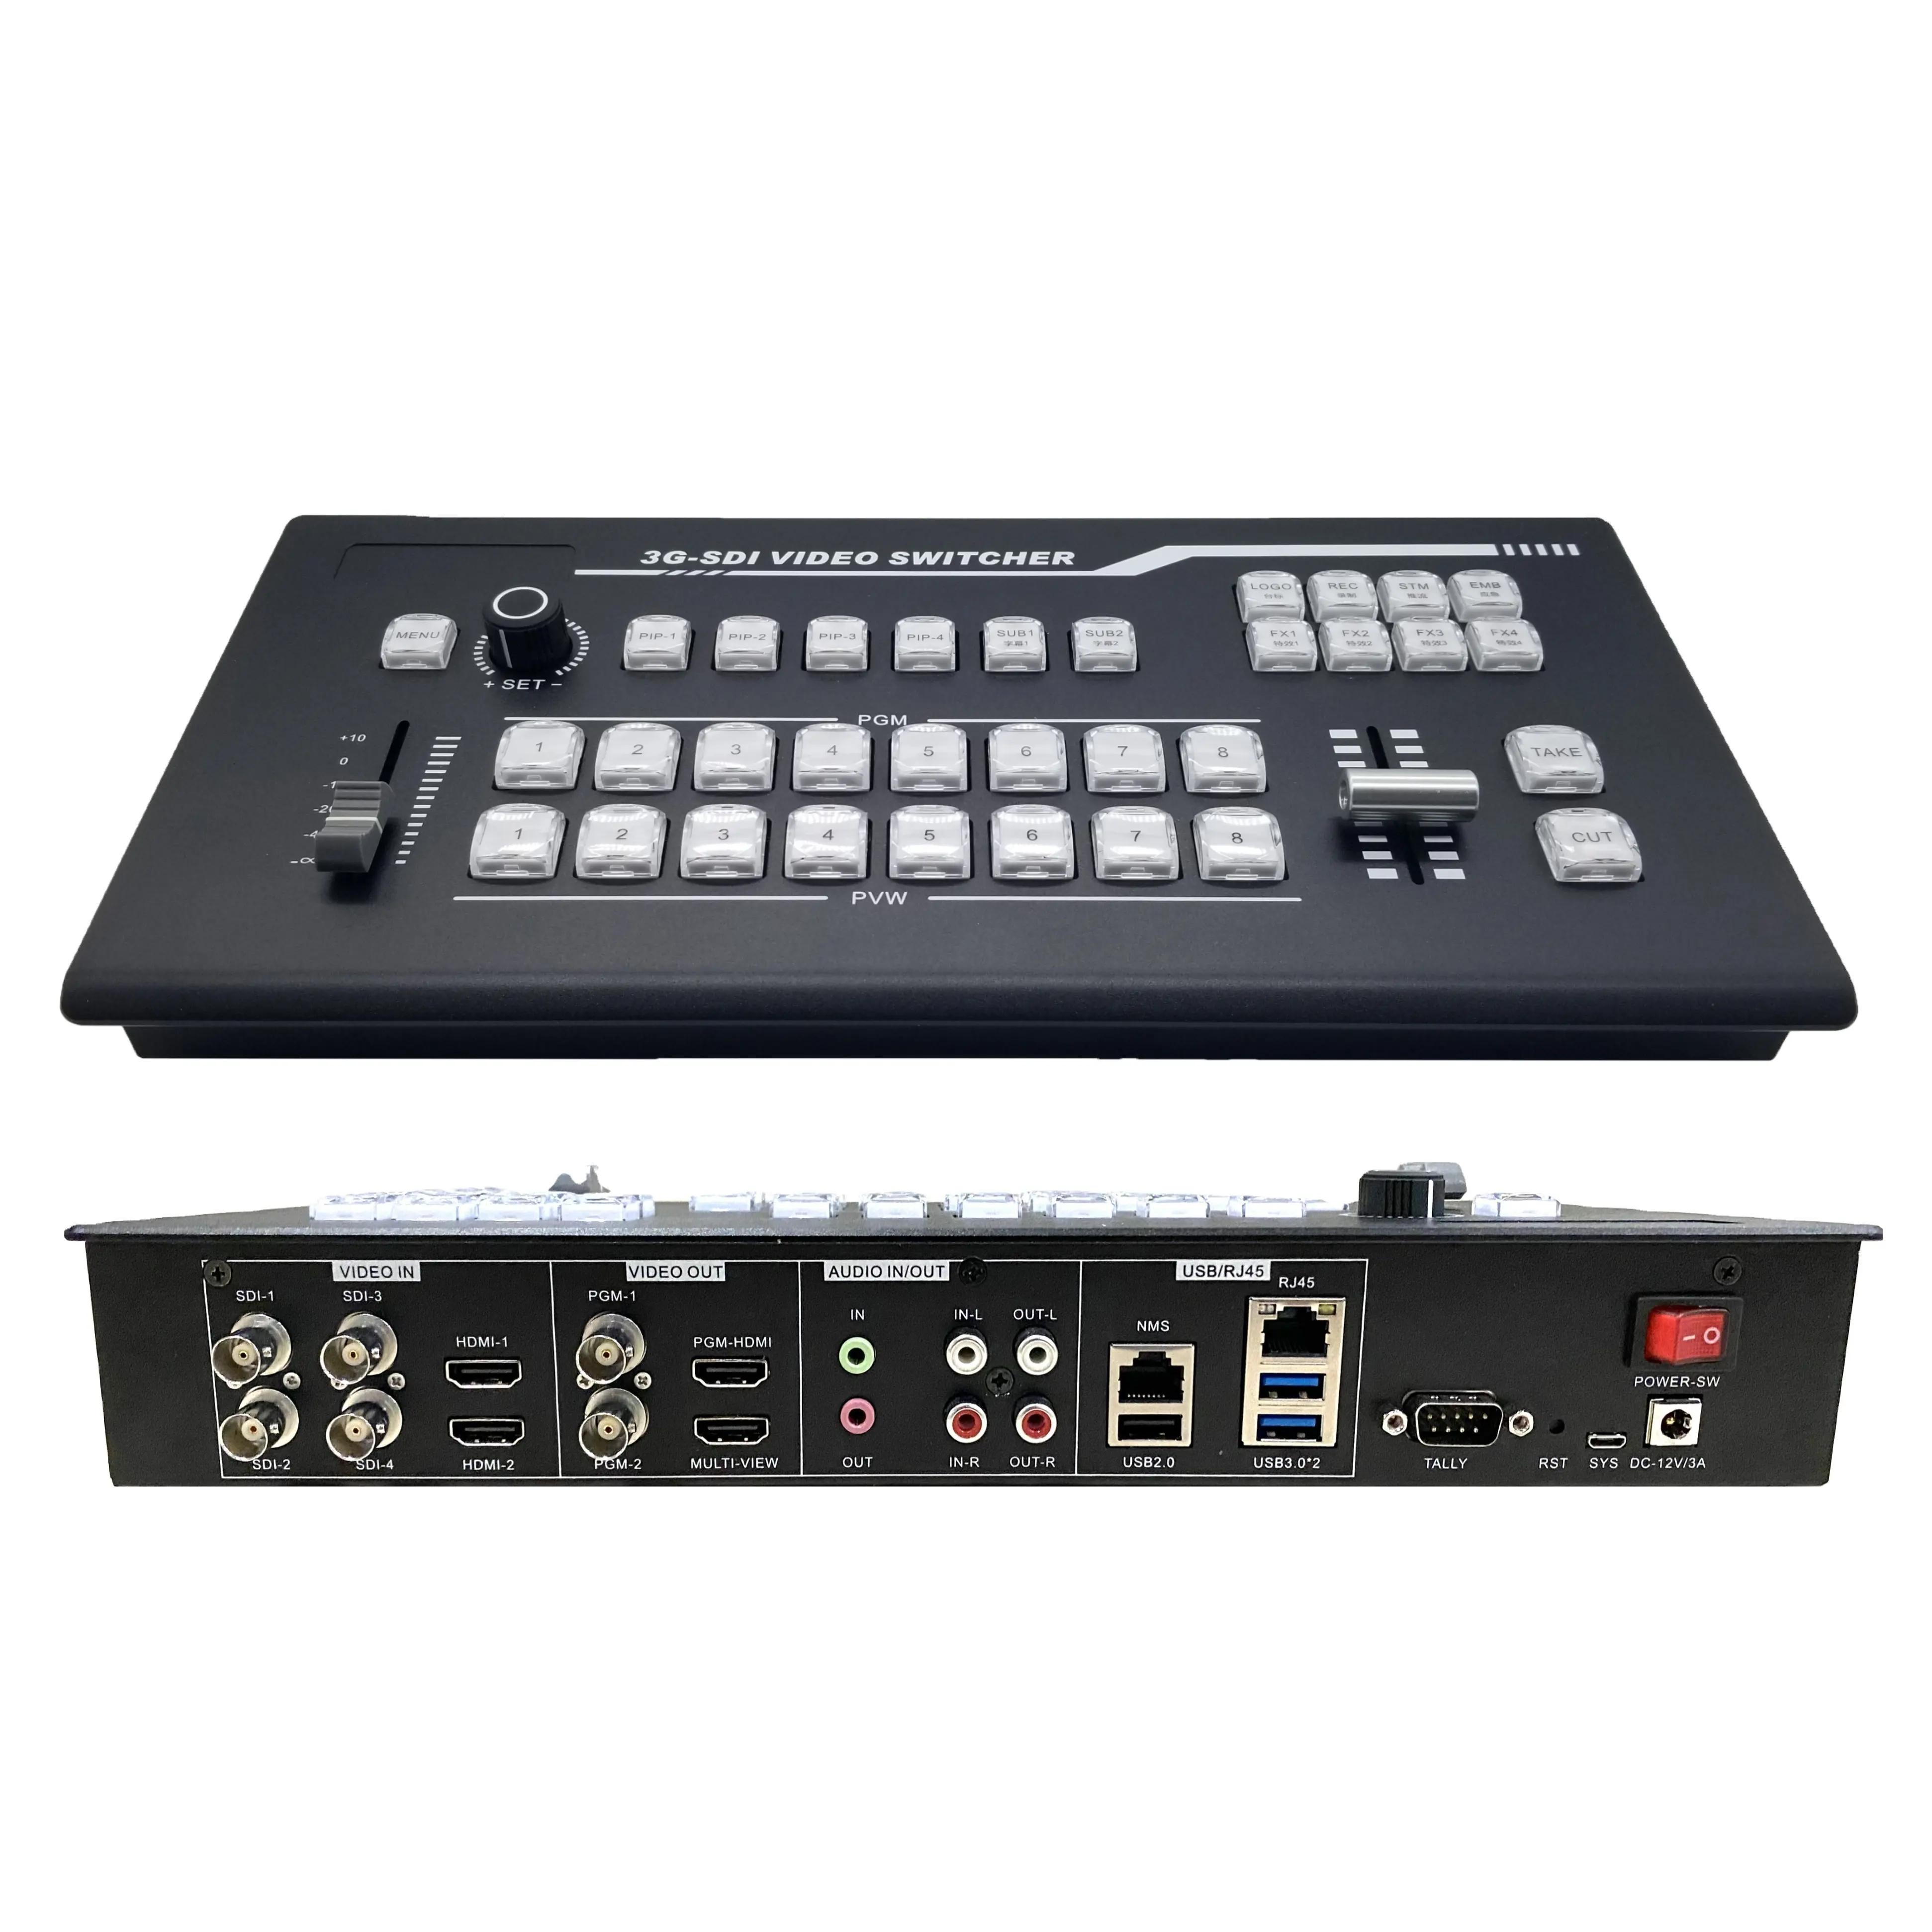 Chroma key functional 8 channel sdi-h dmi switcher de video seamless video switcher for telemedicine/medical surgical/church